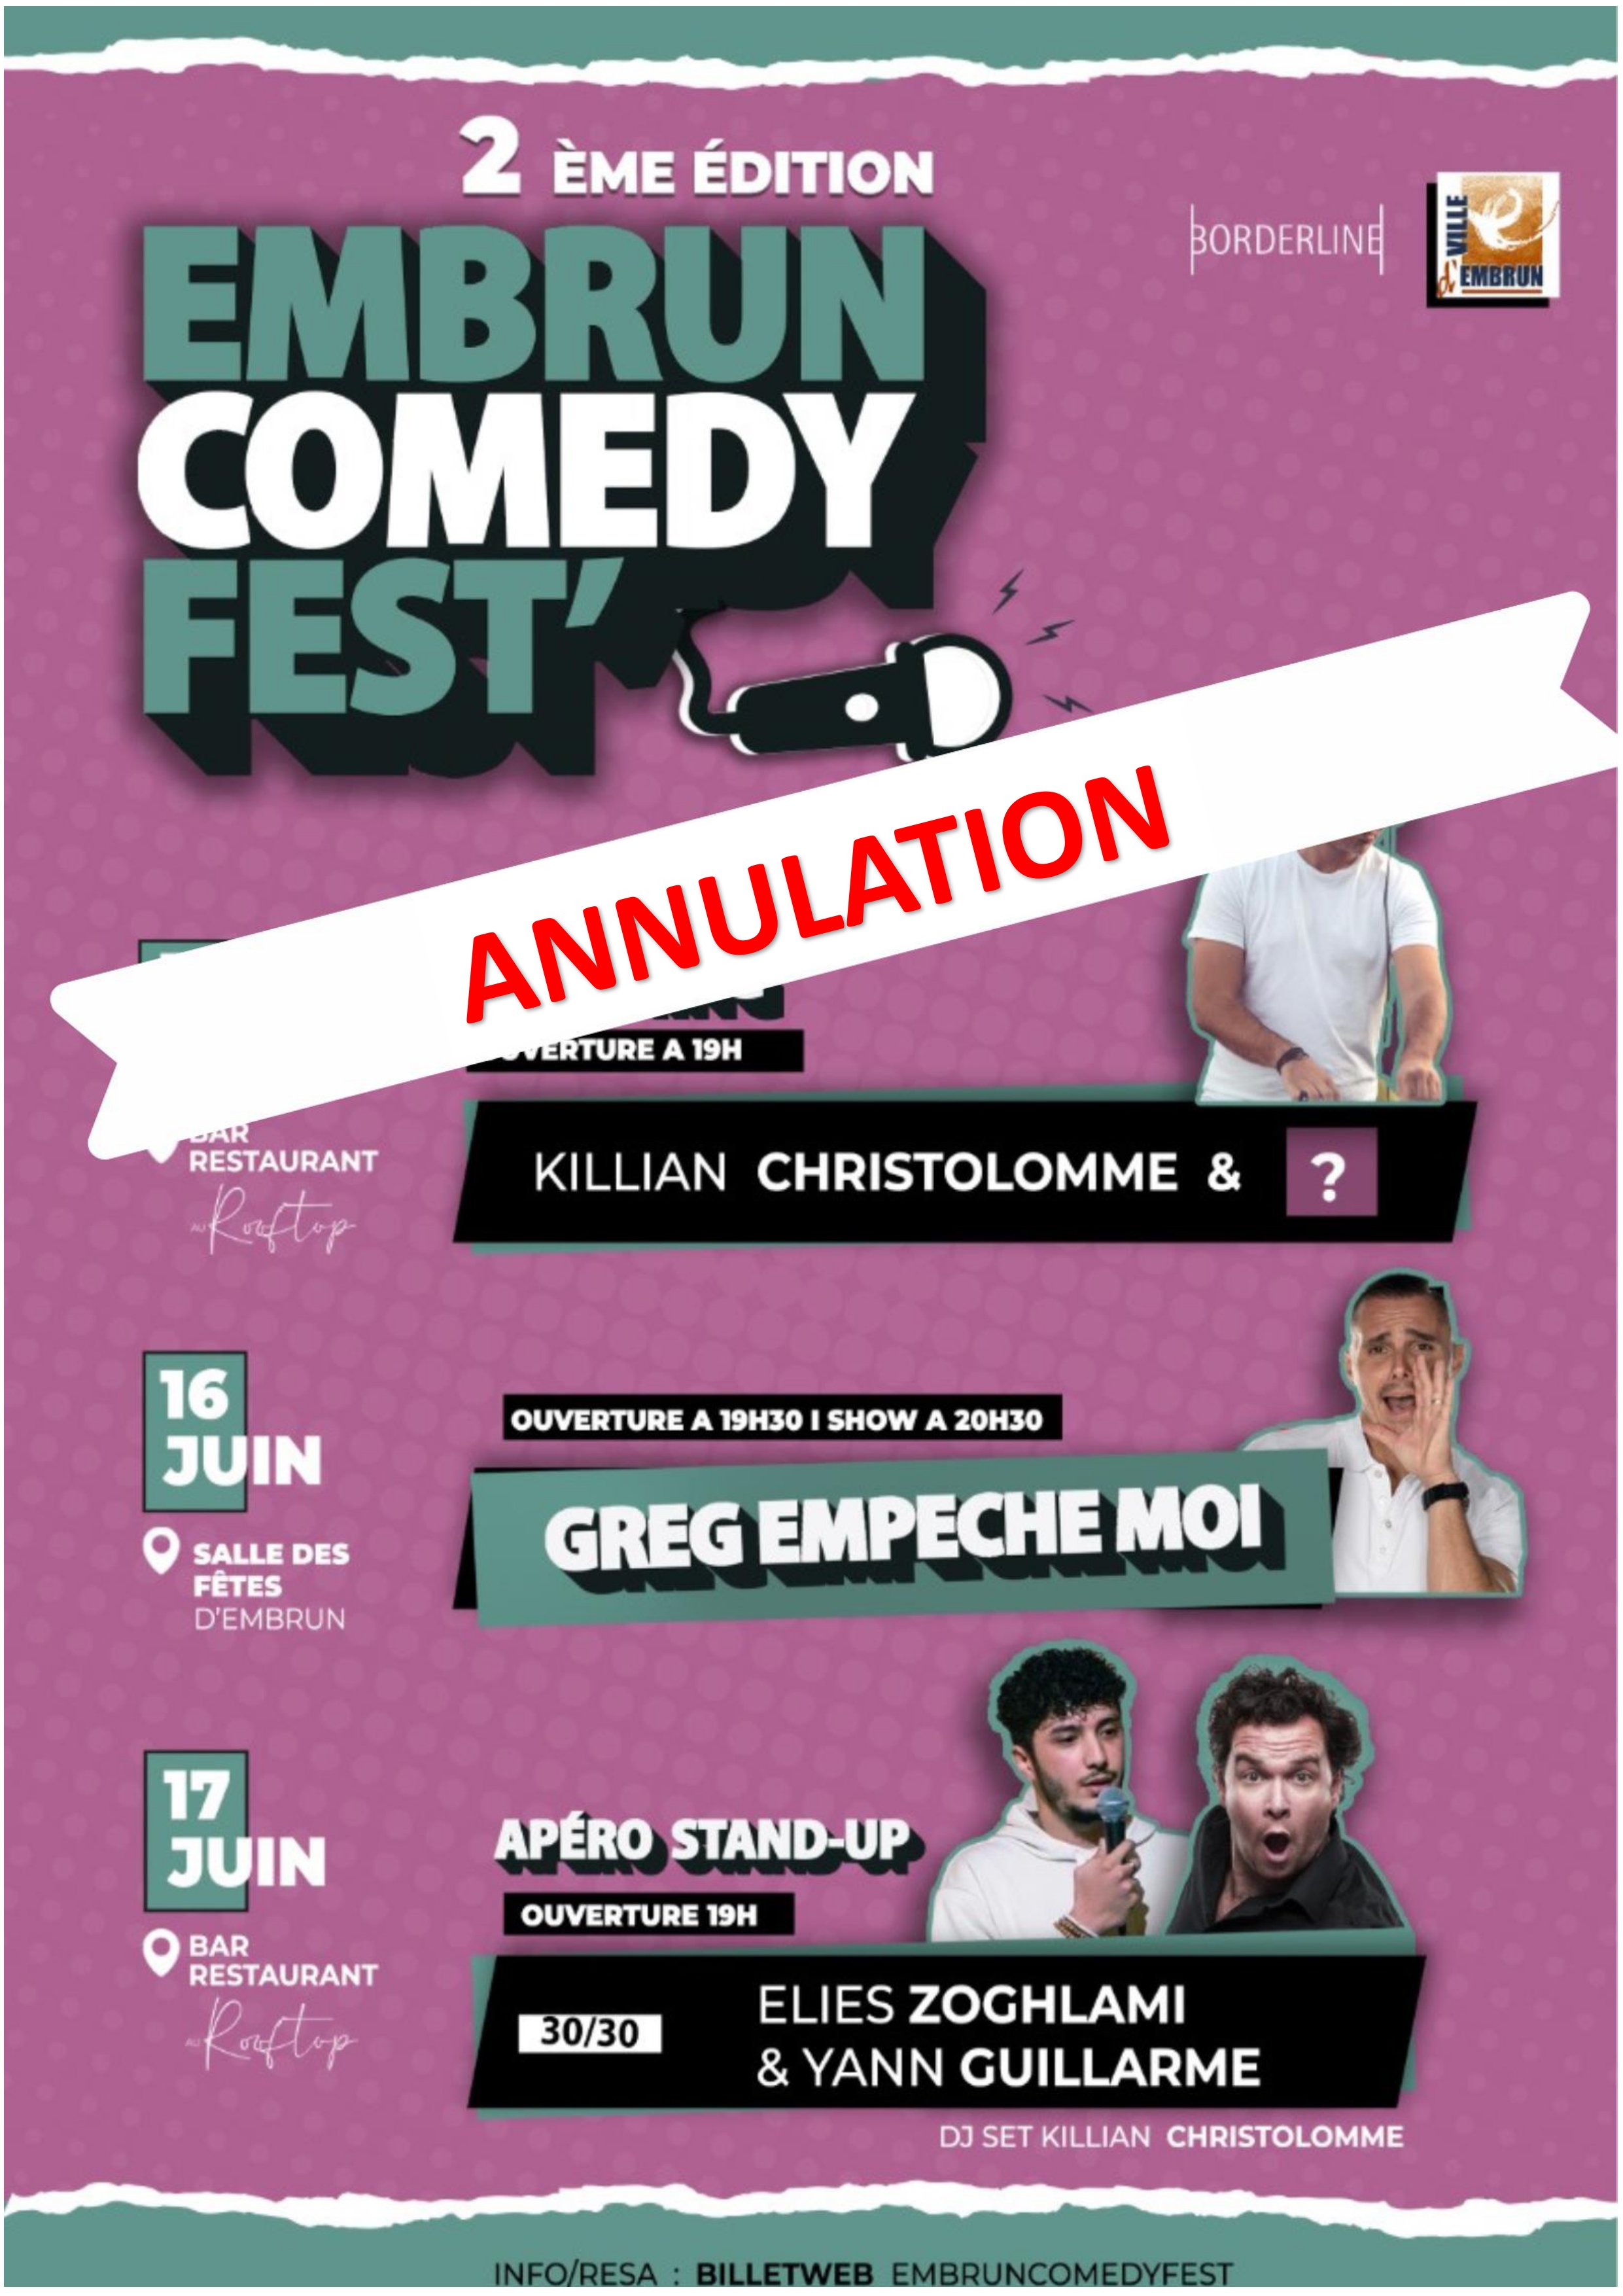 Embrun Comedy Fest' #2 / ANNULE